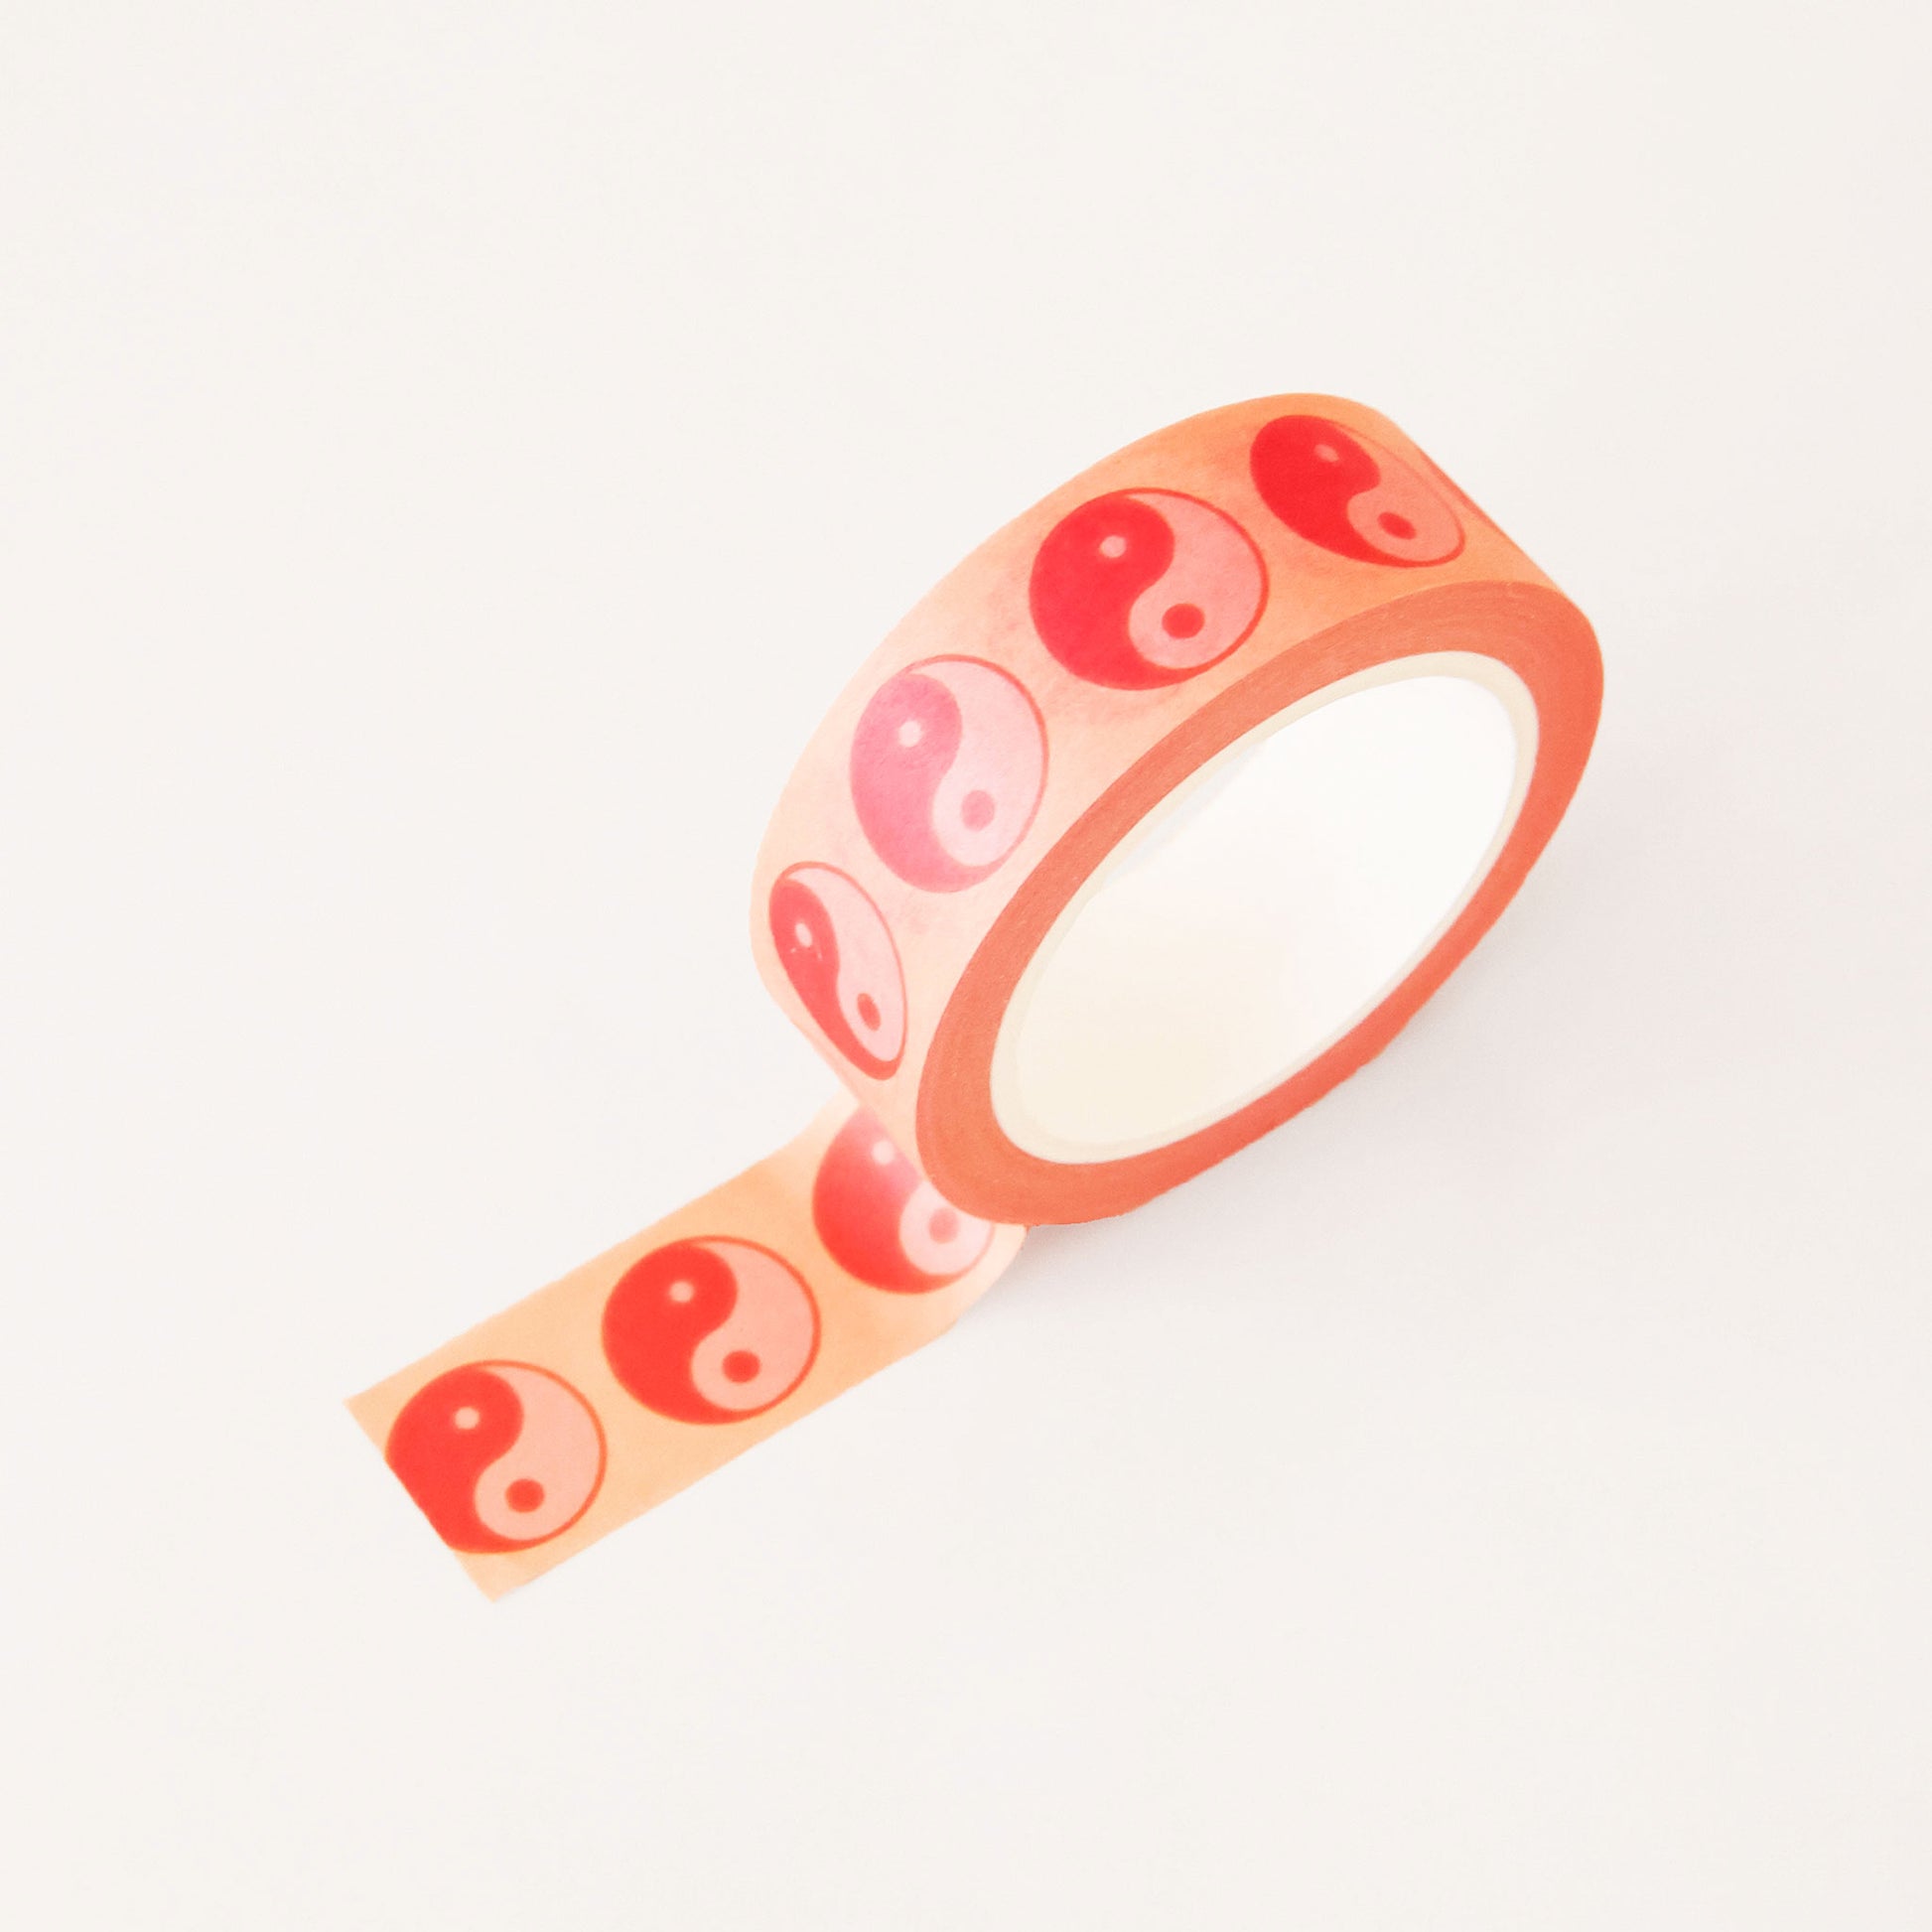 Roll of peach washi tape covered in red and pink yin-yang symbols. The roll is position upright, partially unrolled. 